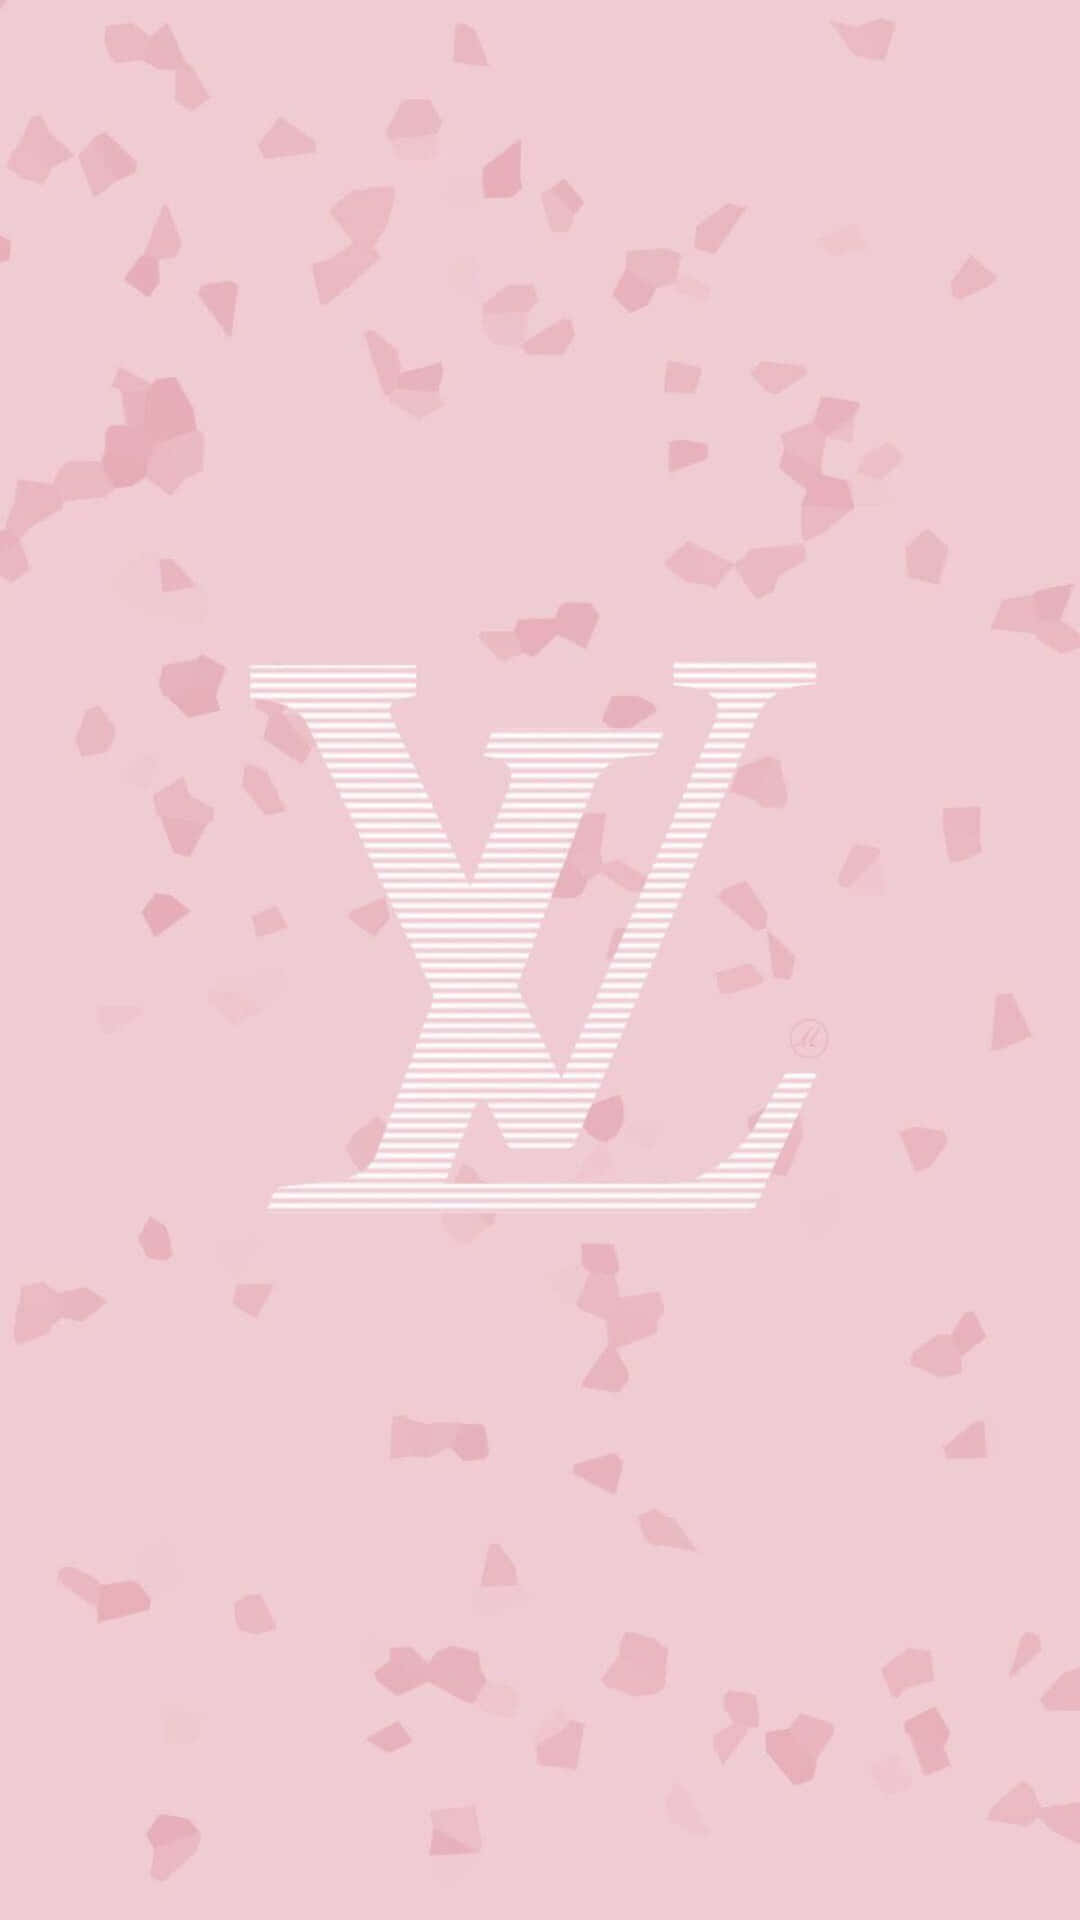 Louis Vuitton Wallpapers - Wallpapers For Your Phone Wallpaper